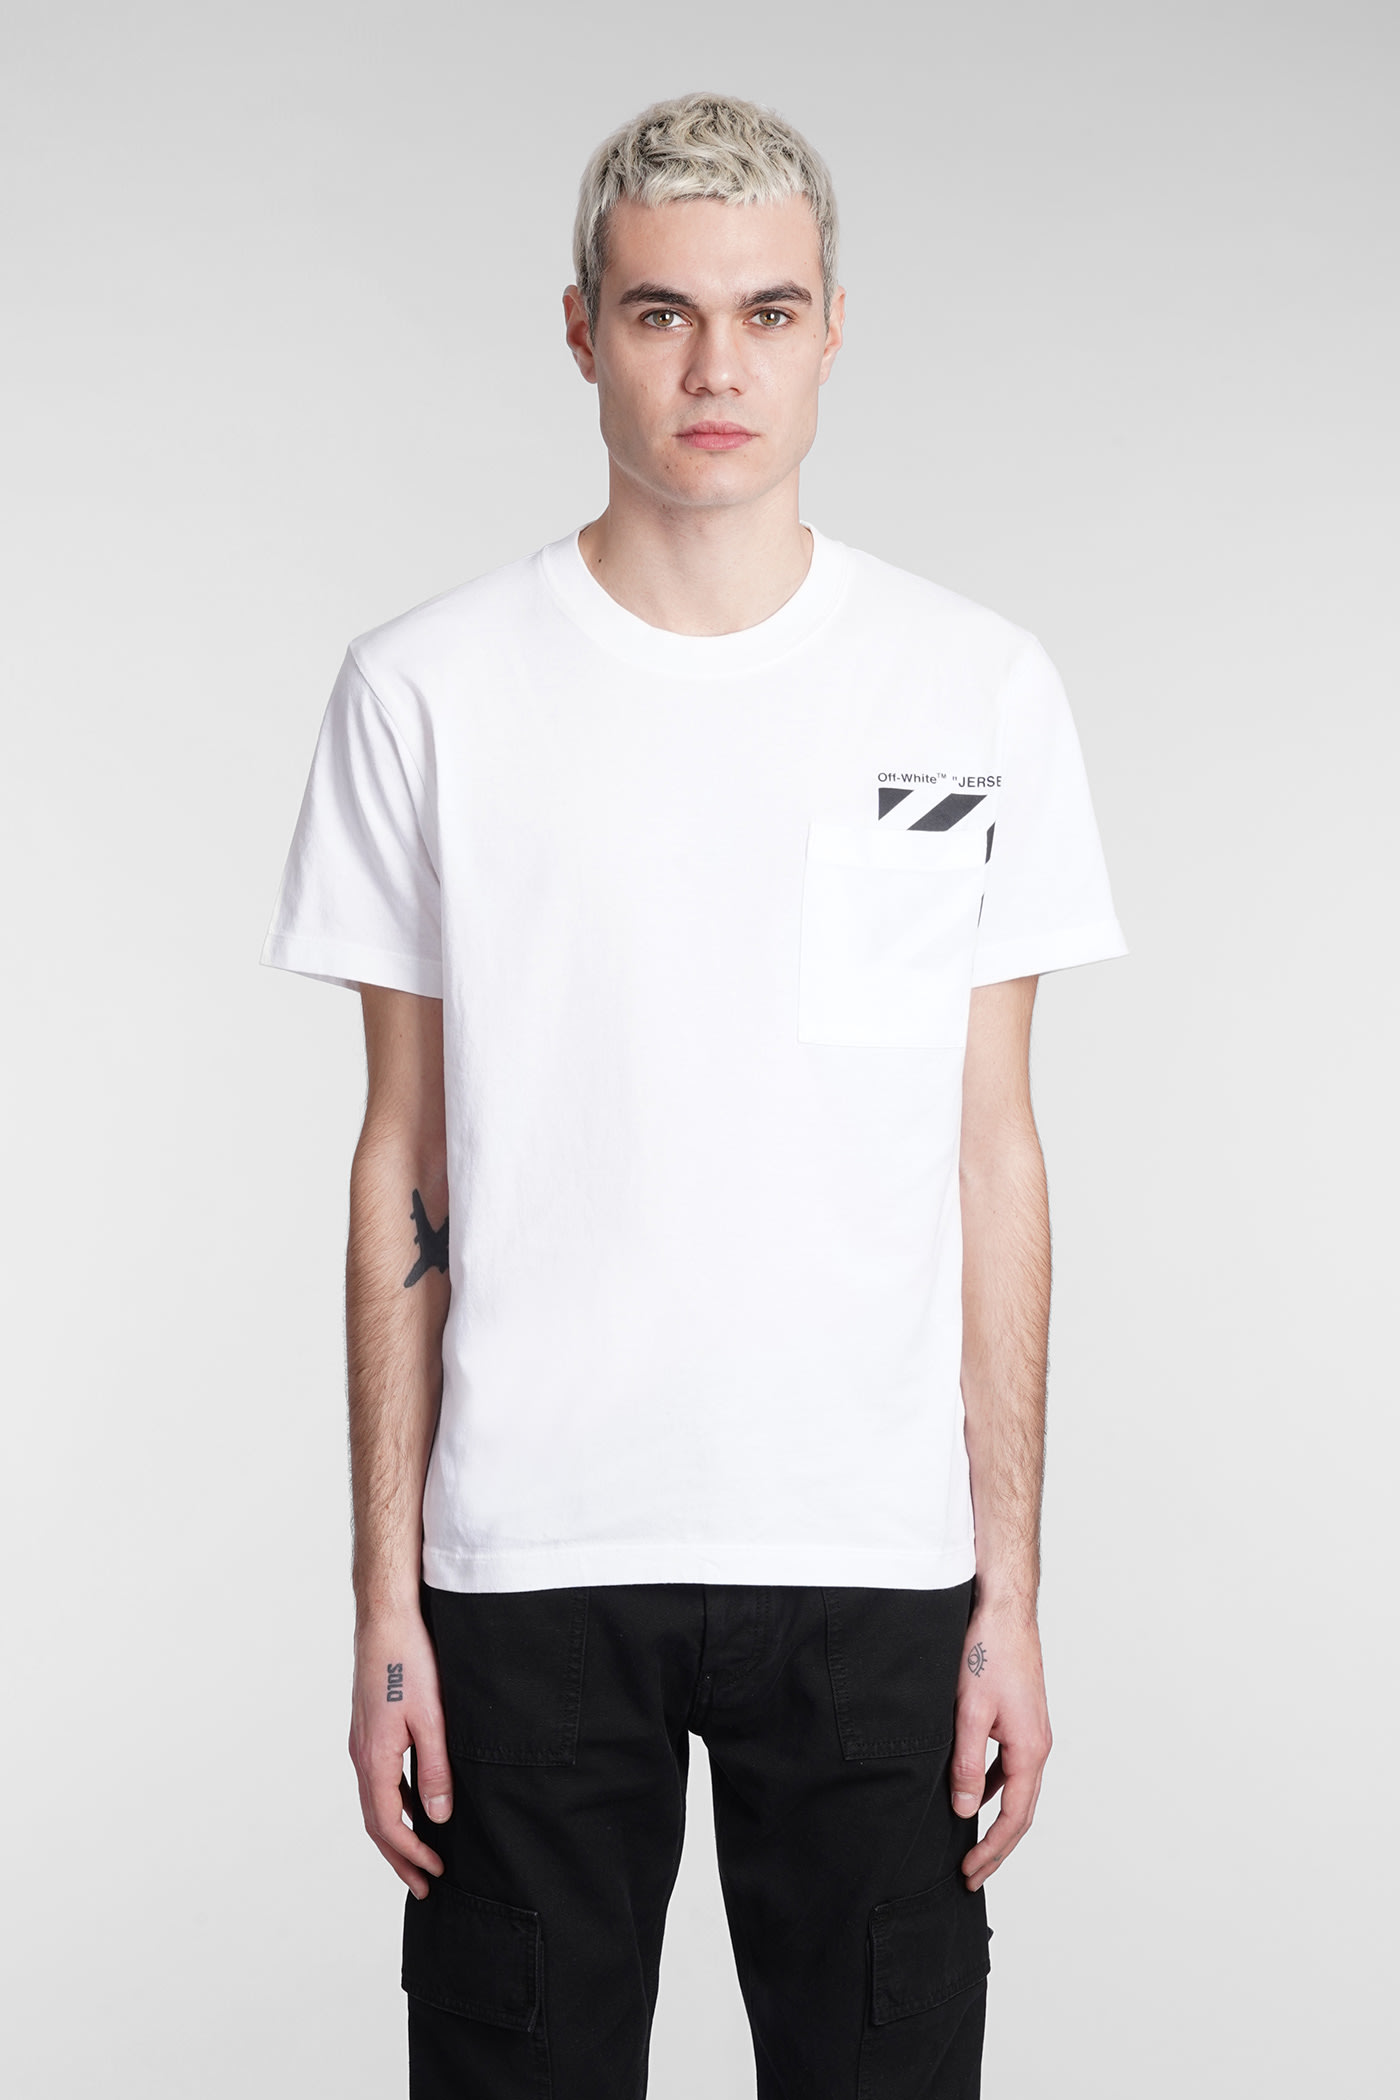 OFF-WHITE T-SHIRT IN WHITE COTTON